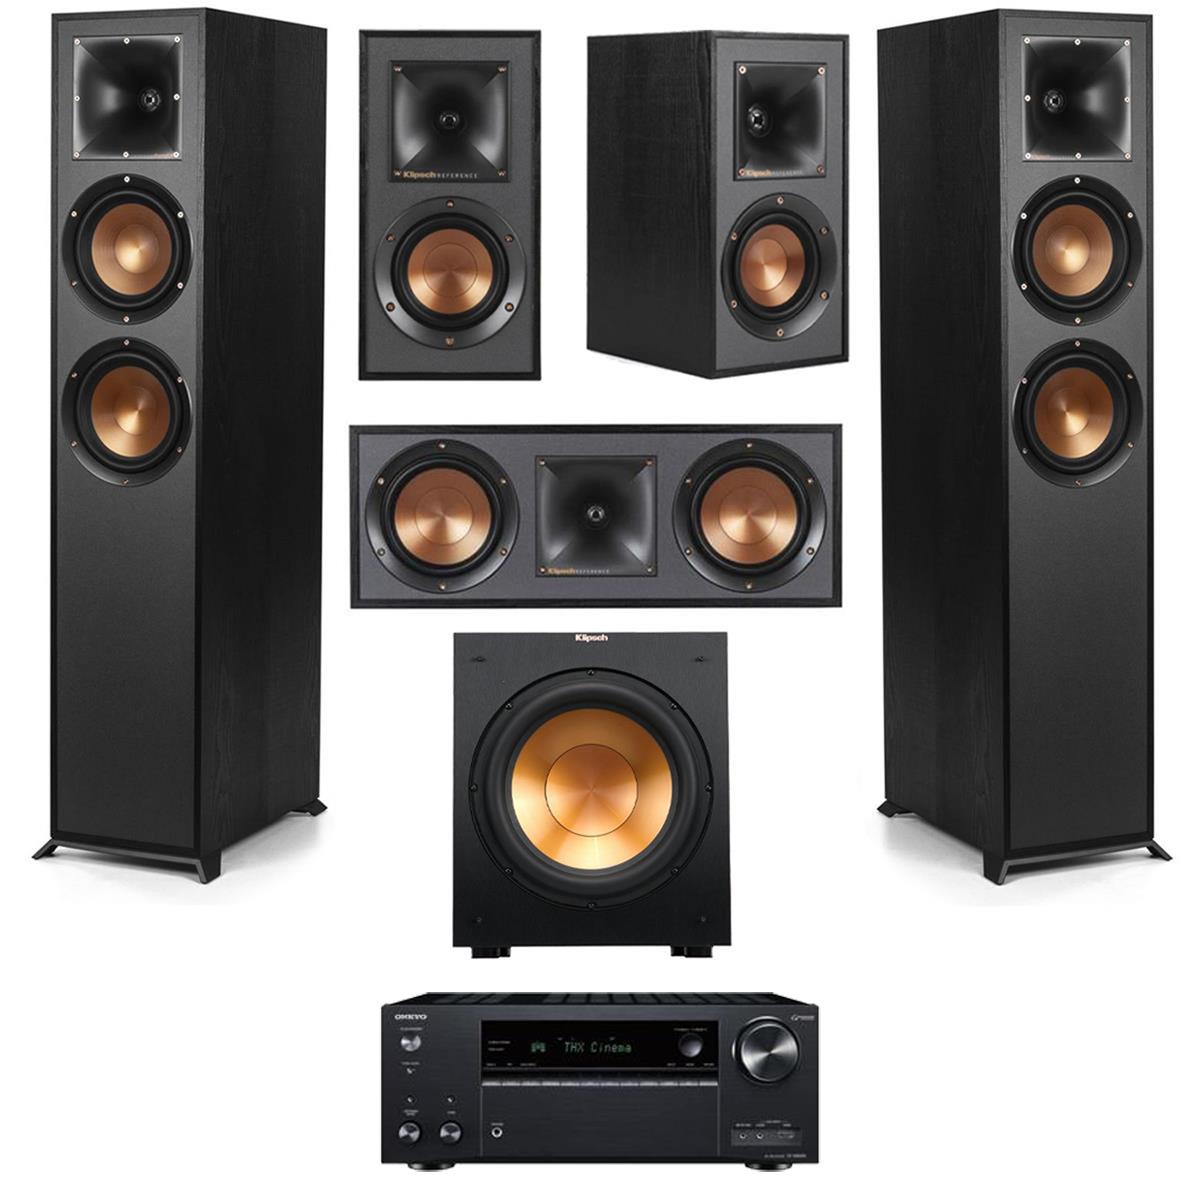 Klipsch Reference 5.1 Home Theater System, Black w/ Denon AVR-S970H 7.2 Receiver -  1065834 K4